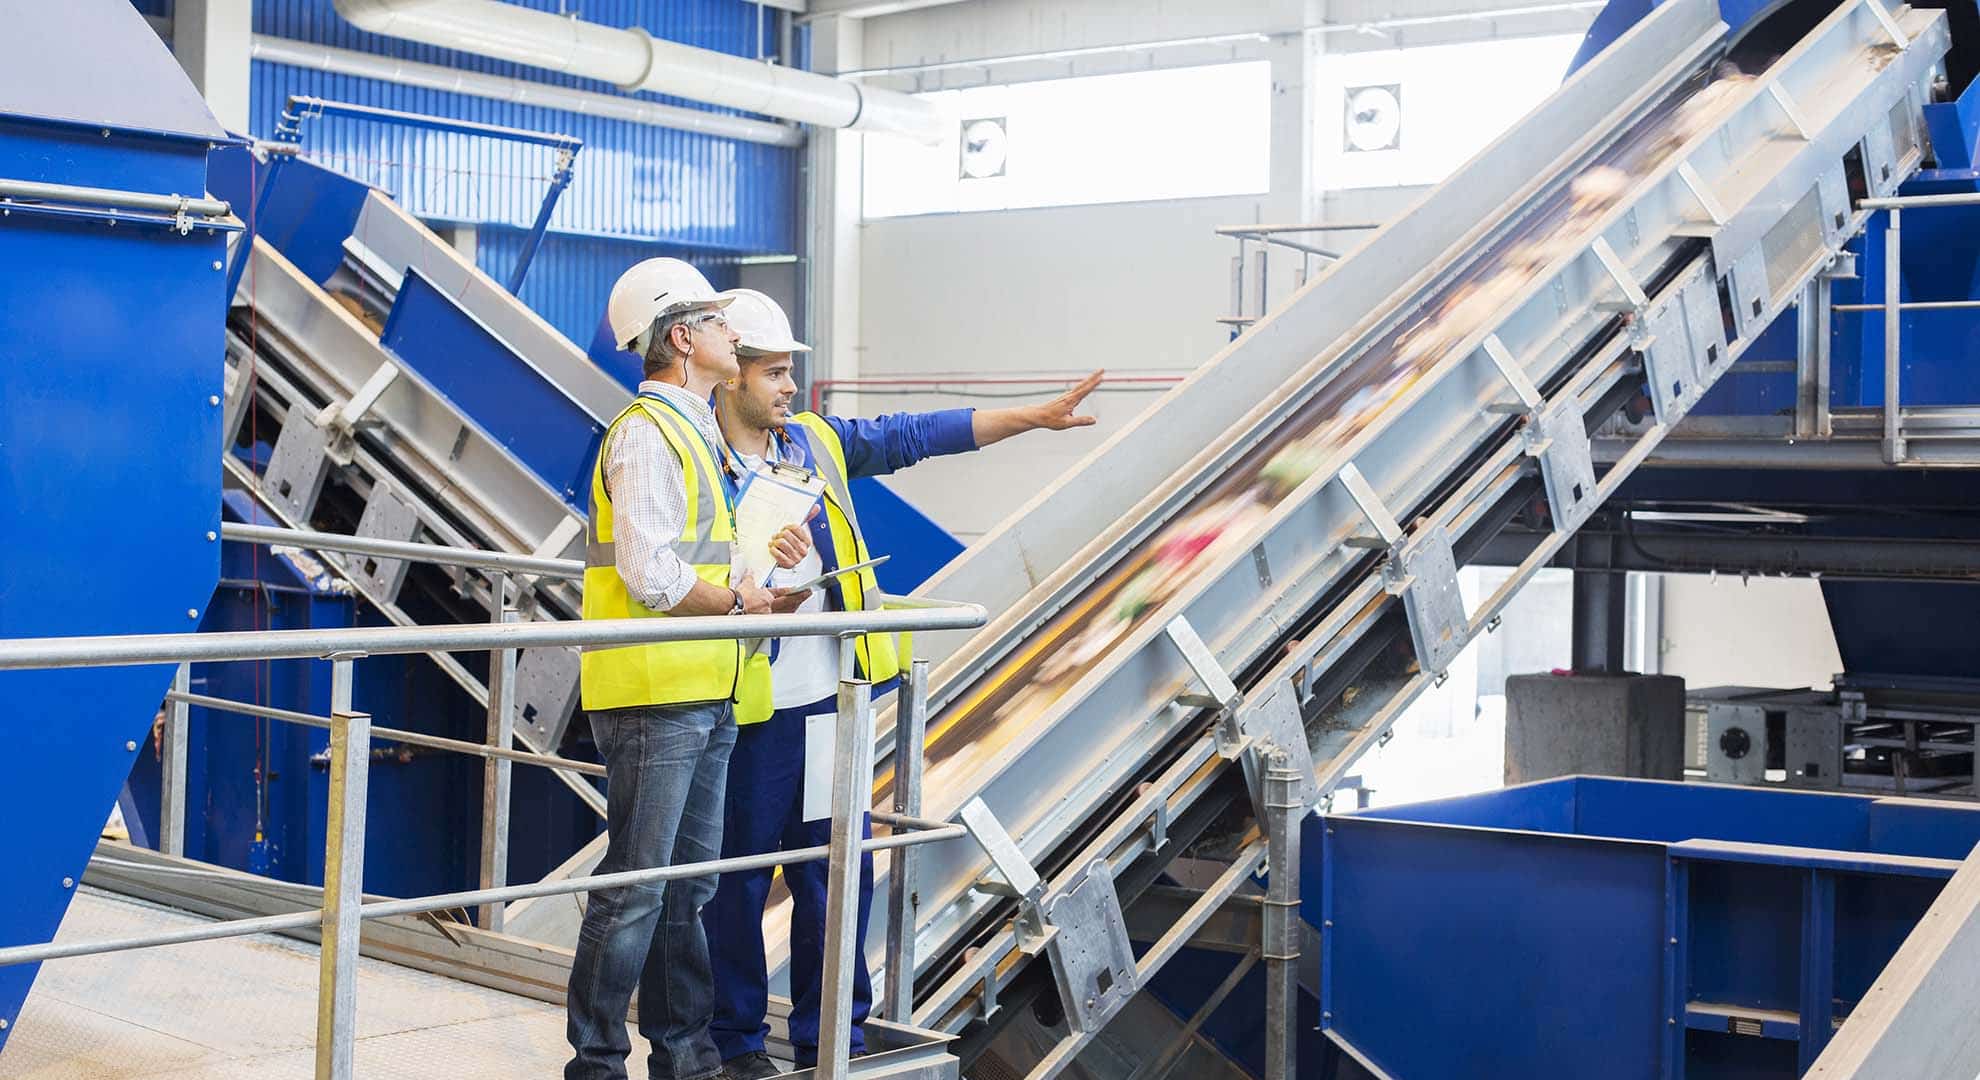 Photo of two people in high viz jackets and hard hats beside a conveyor belt with recylable materials